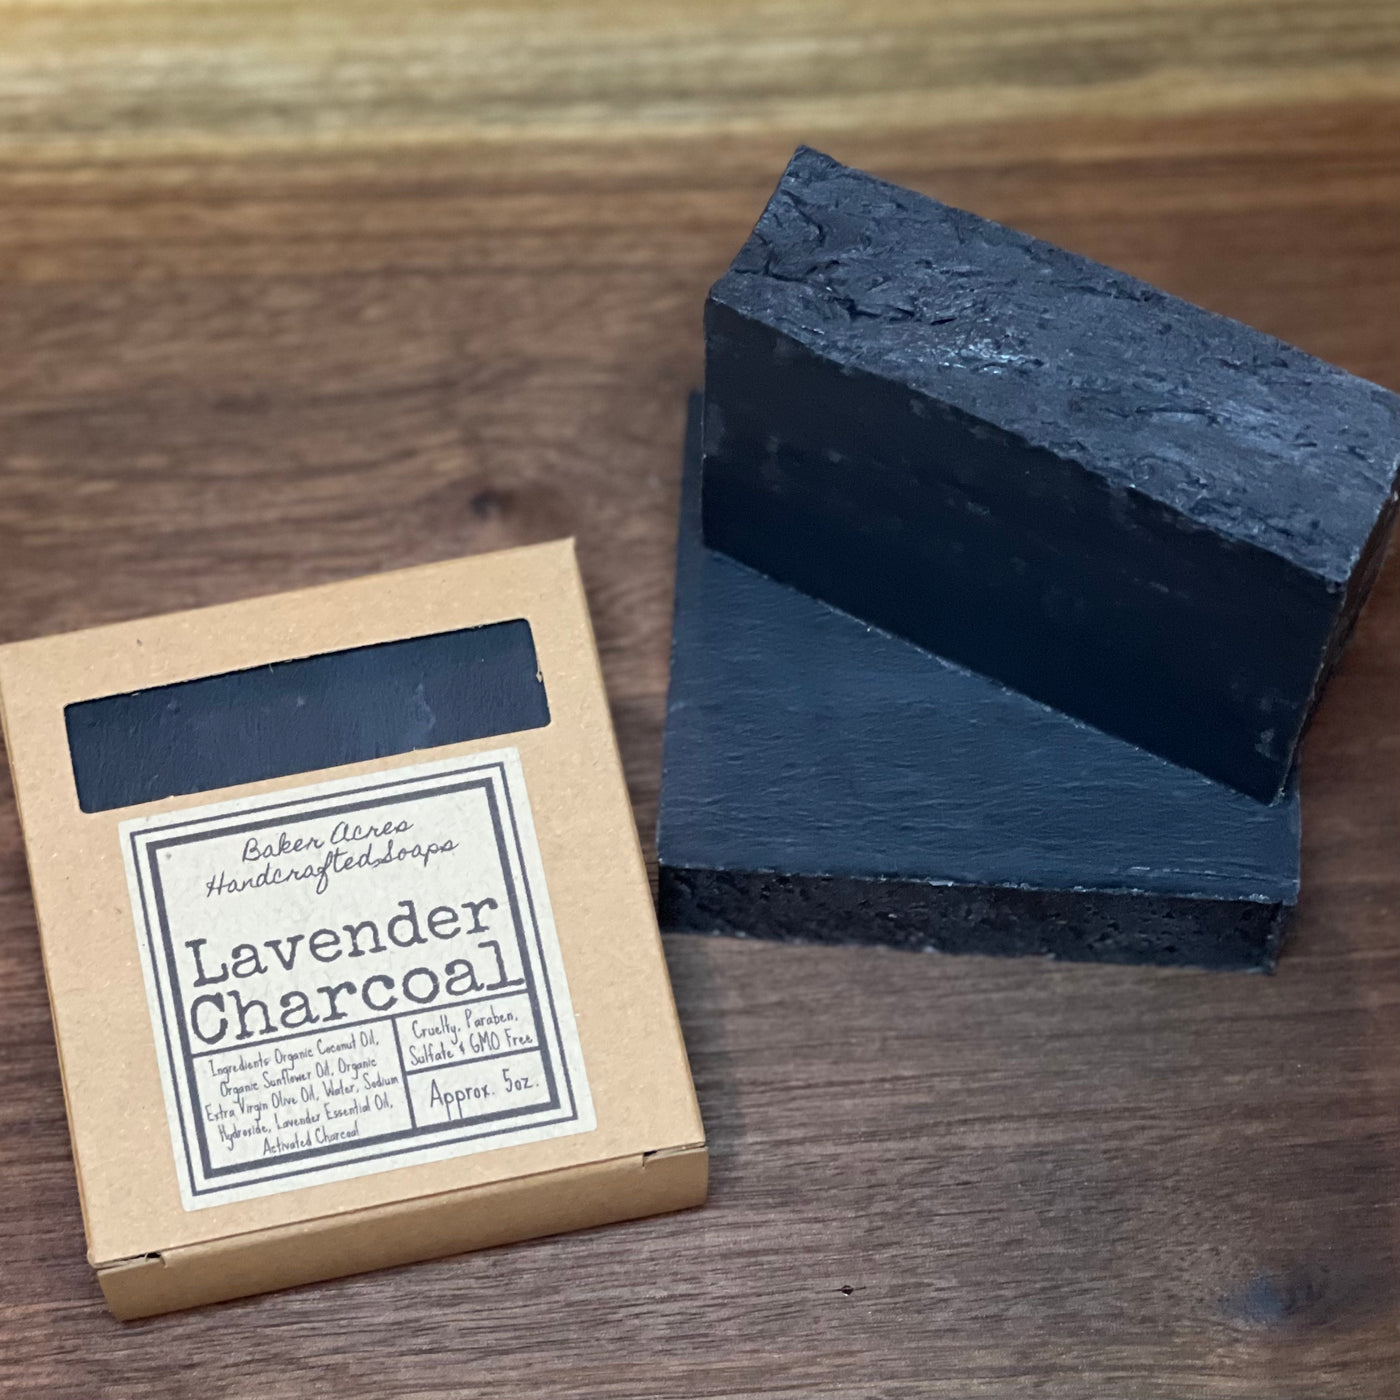 Lavender Charcoal Handcrafted Soap